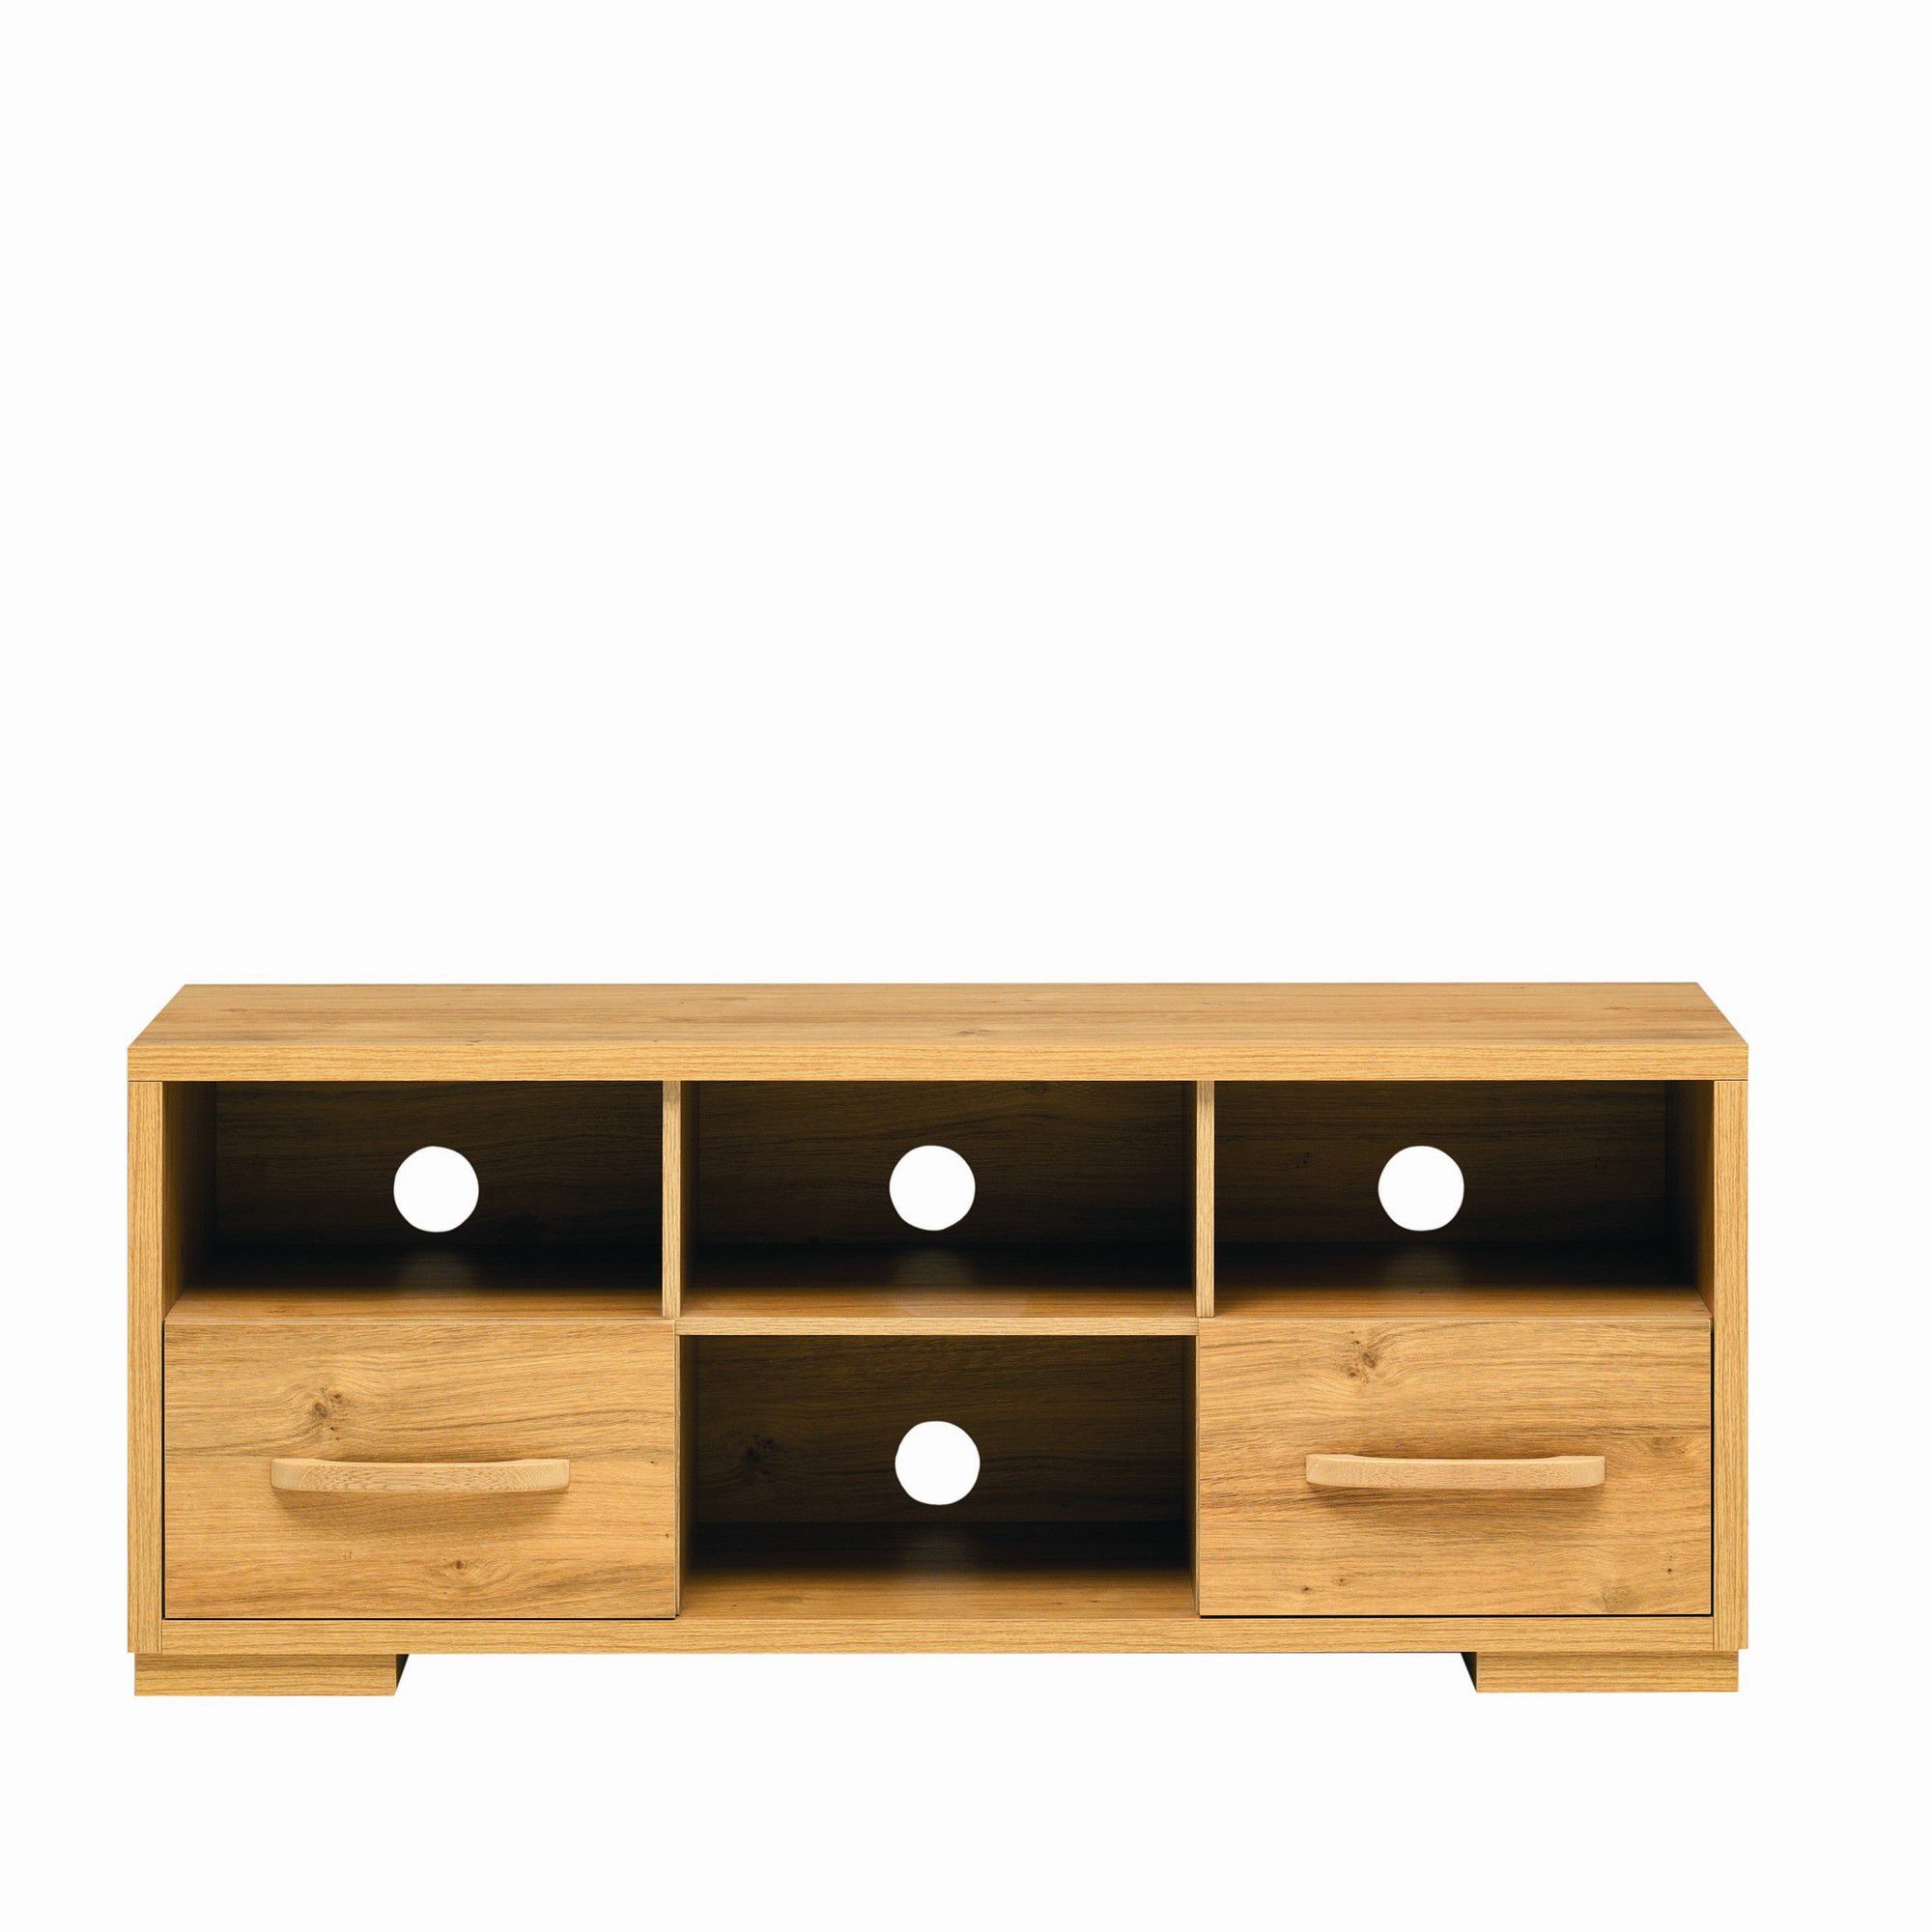 Caxton Strand Wooden TV Cabinet at Tesco Direct